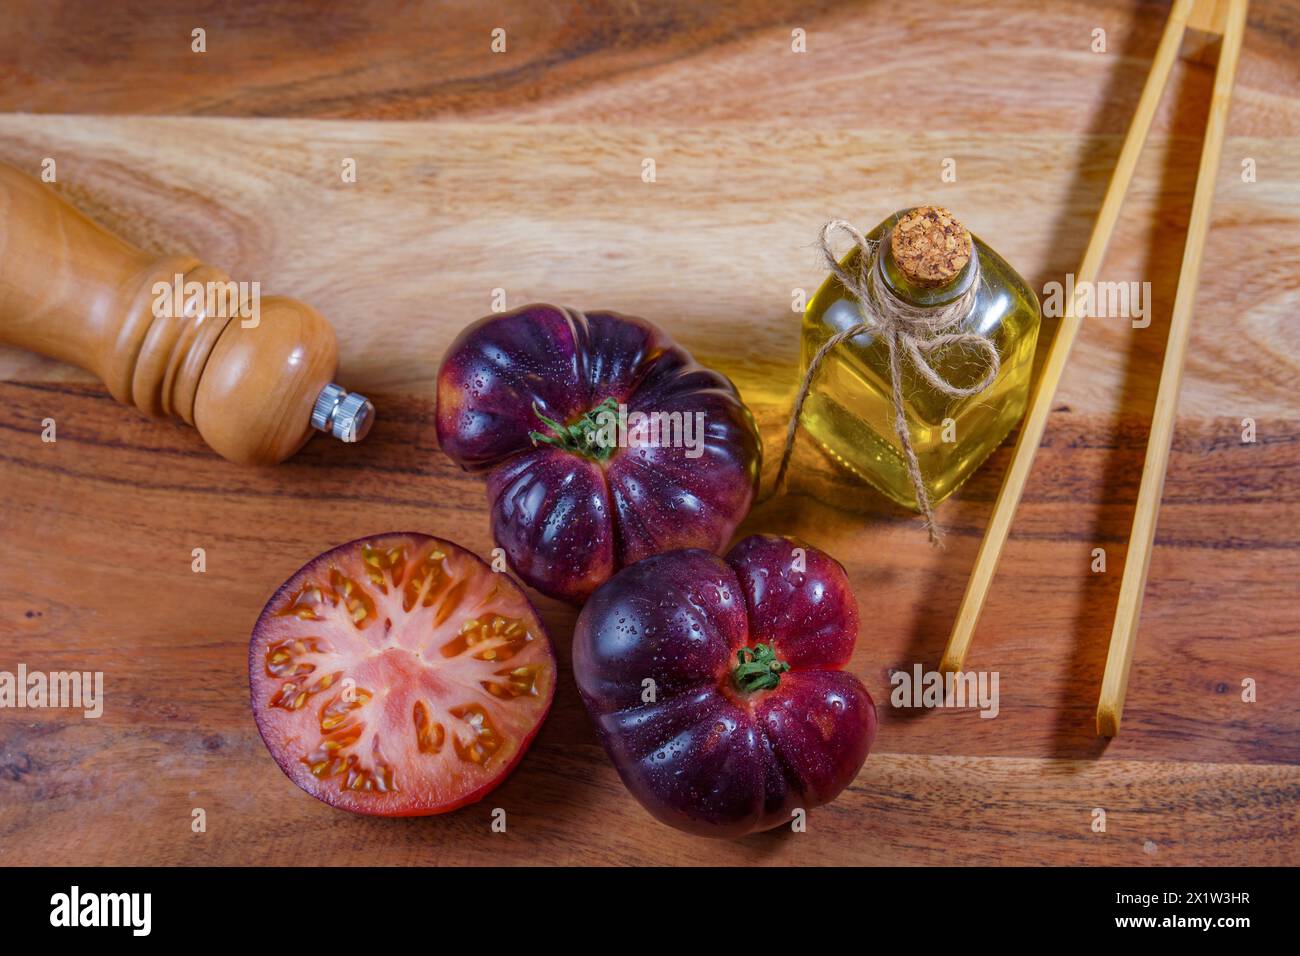 Top view of a group of tasty fresh tomatoes of the blue variety next to some wooden tongs, olive oil and a pepper shaker on a wooden table Stock Photo